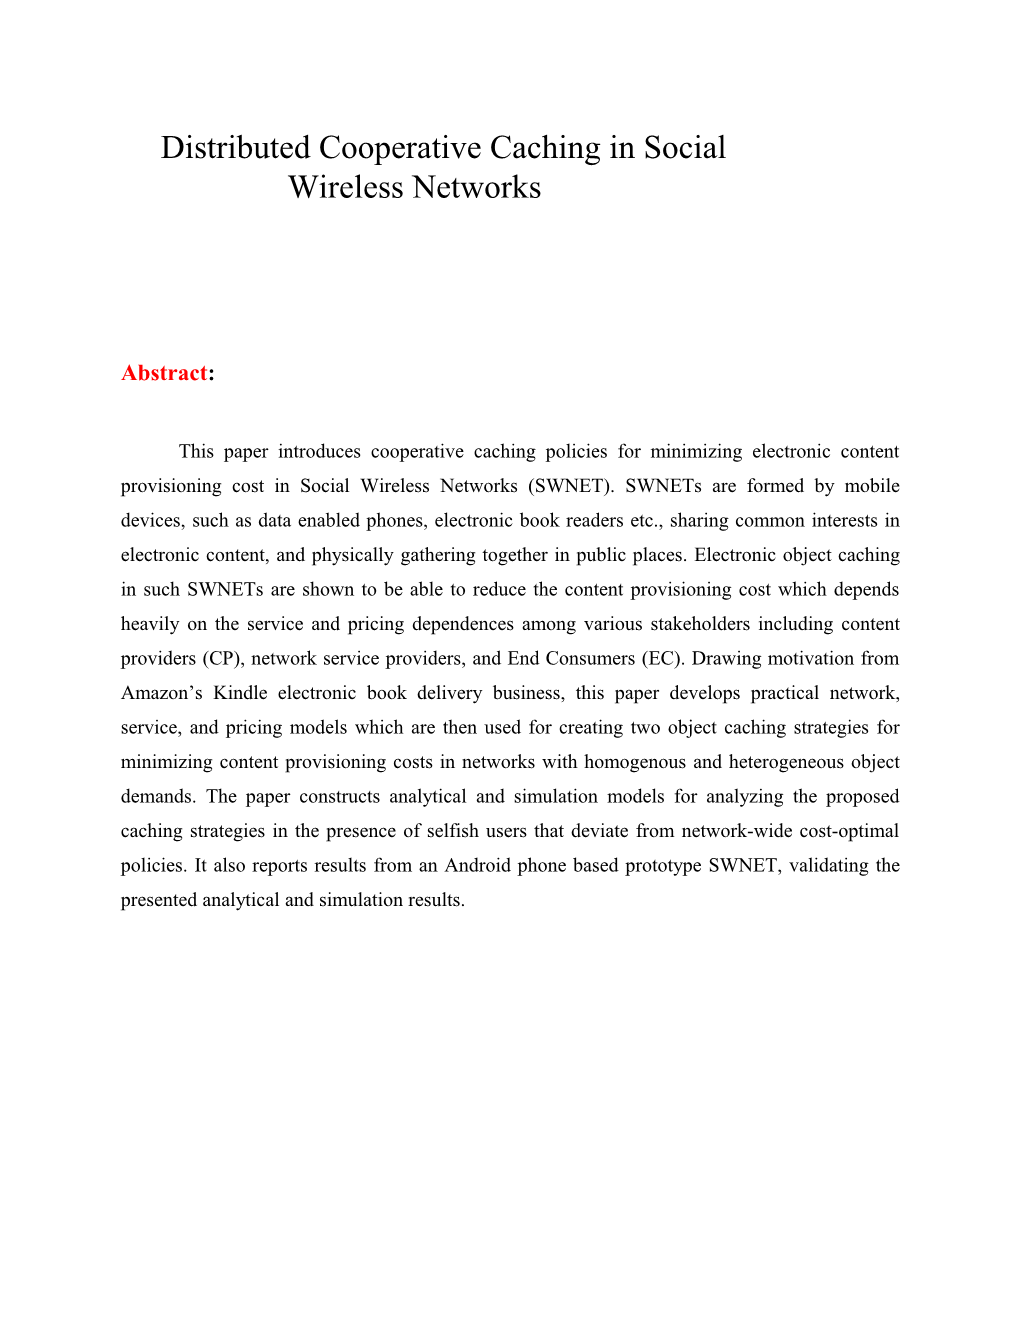 Distributed Cooperative Caching in Social